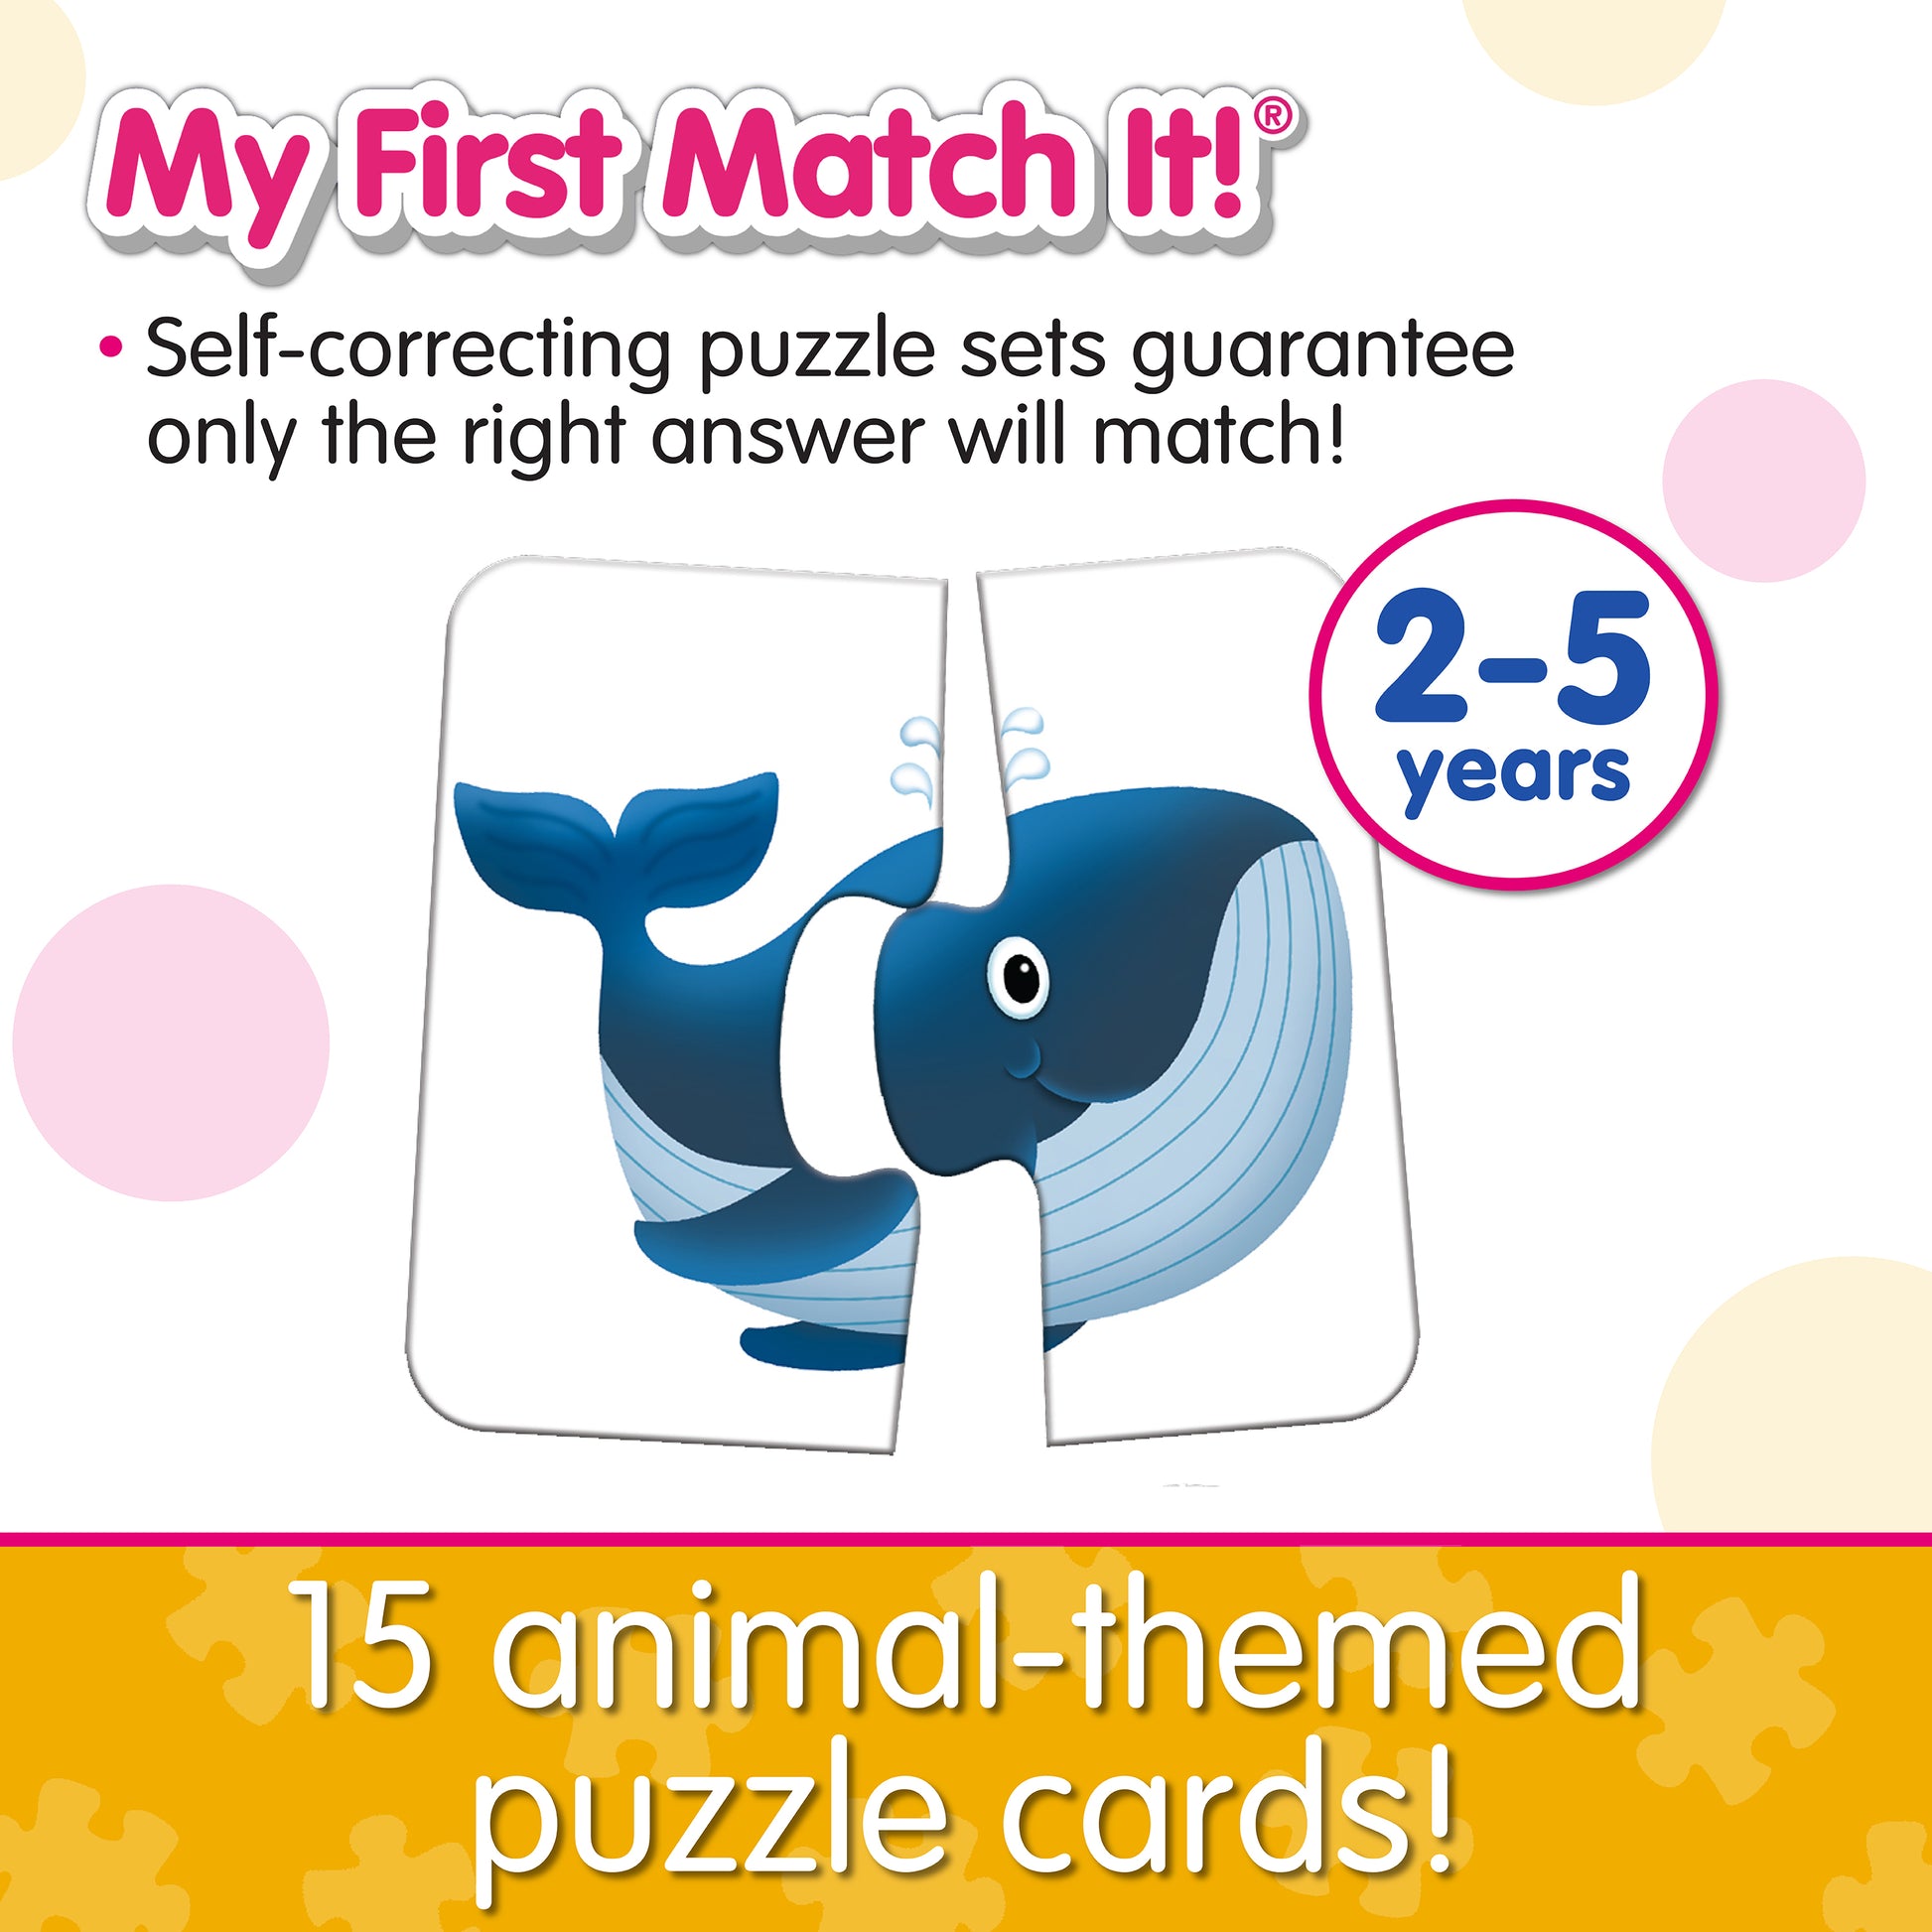 Infographic about My First Match It - Heads and Tails' features that says, "15 animal-themed puzzle cards!"